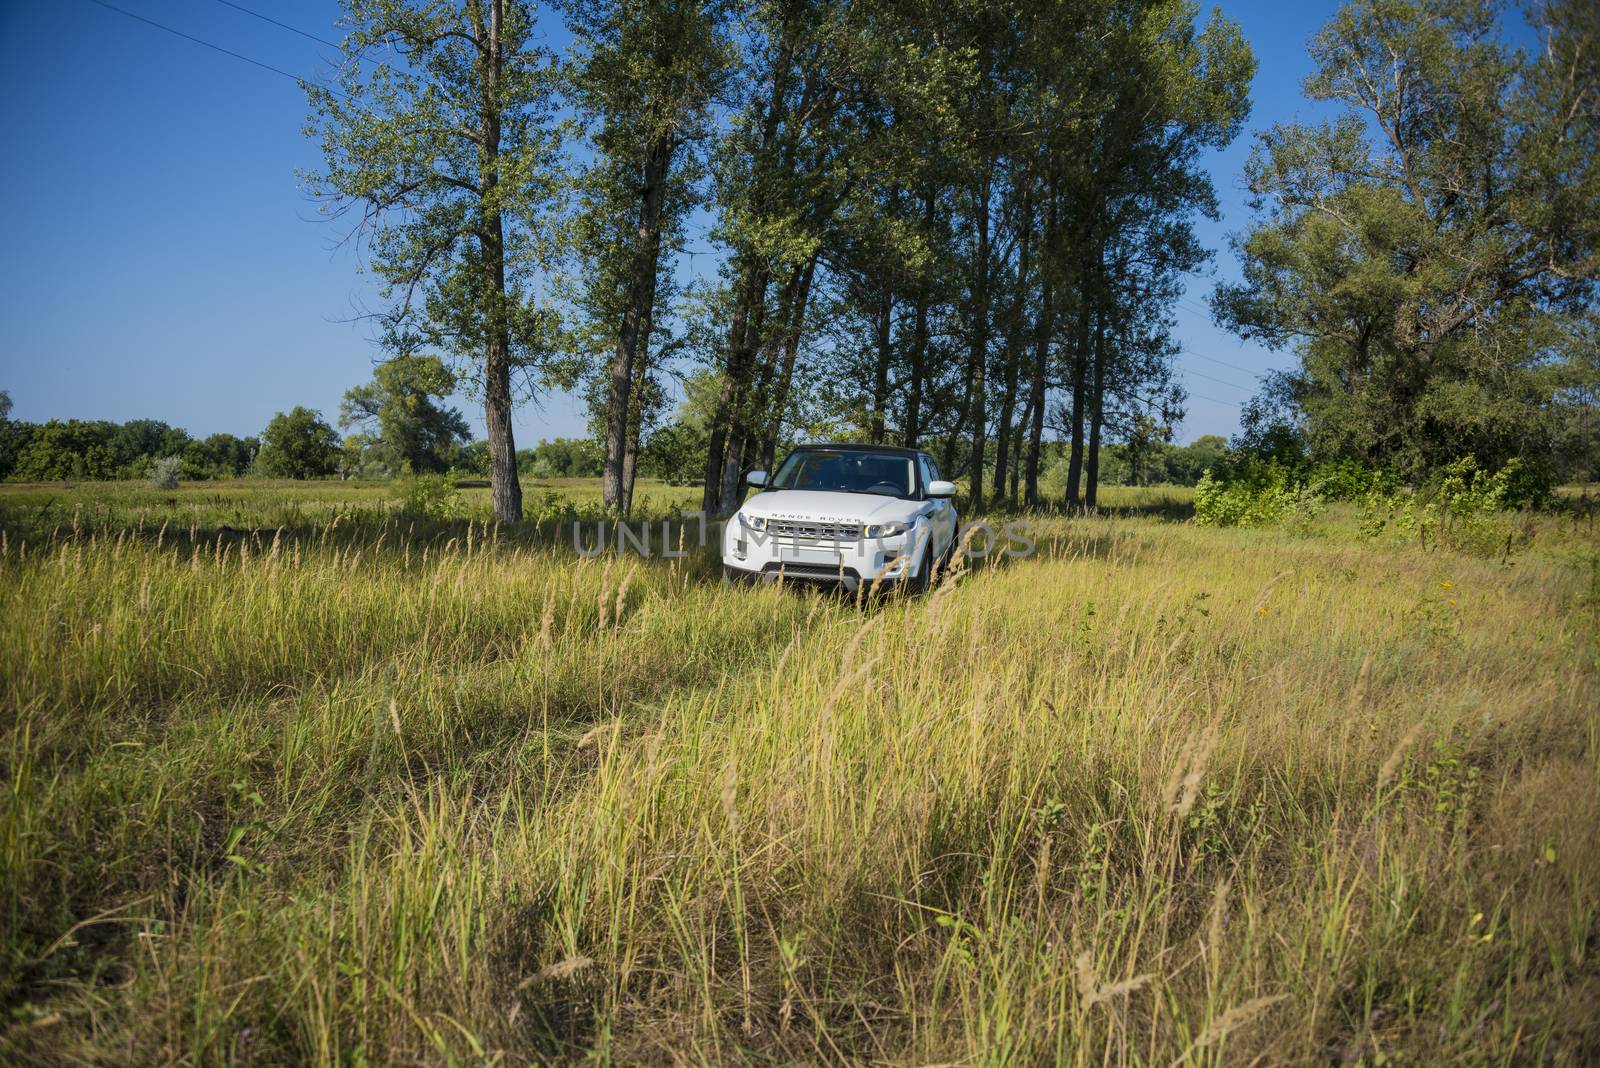 Car Land Rover Range Rover in summer Sunny weather in the summer landscape of the Samara region, Russia. August 21, 2018.